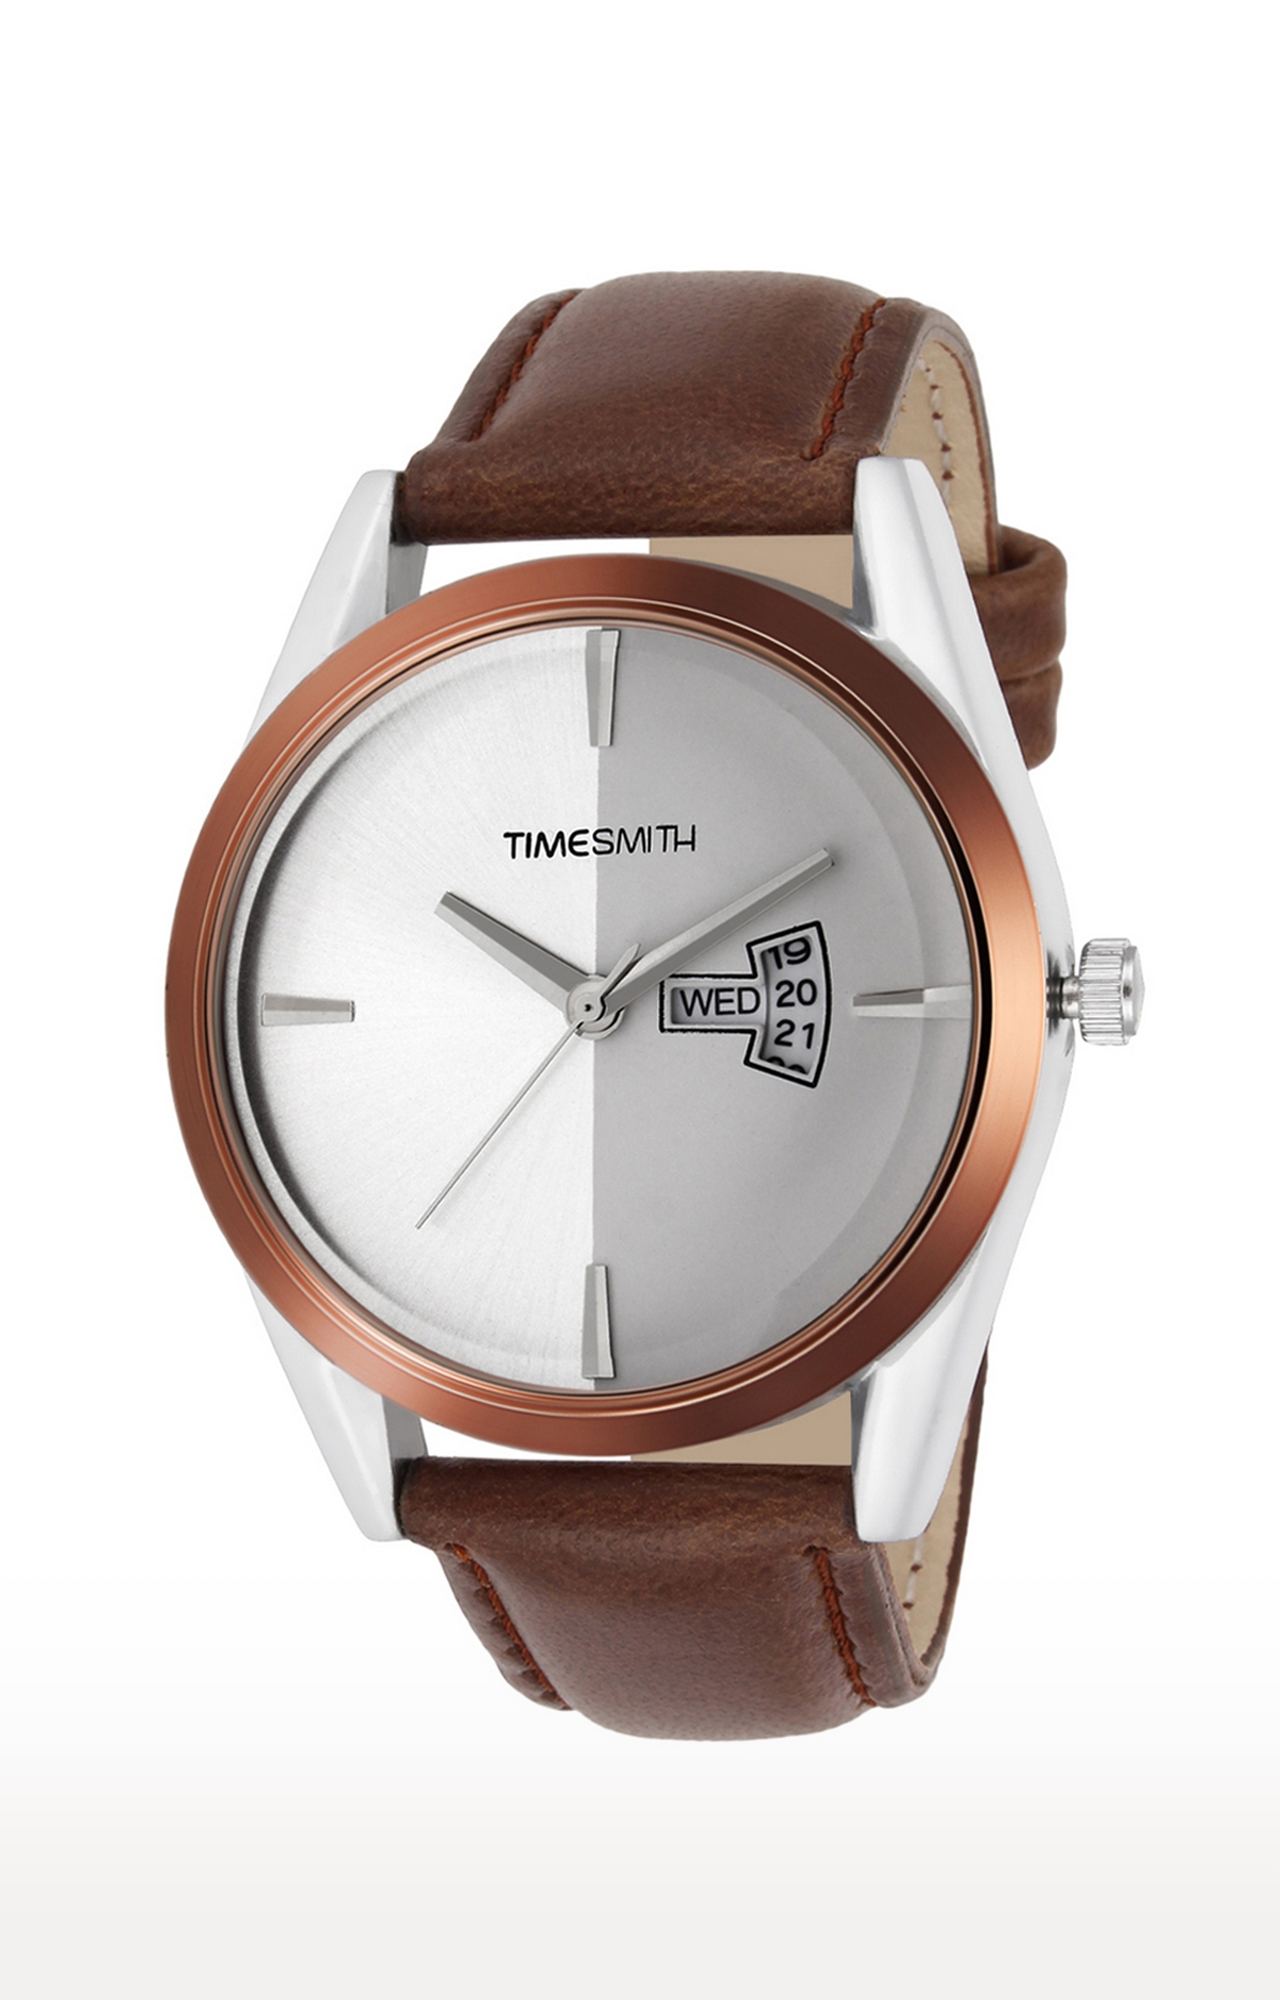 Timesmith | Timesmith White Dial Brown Leather Strap Genuine Watch TSC-015mtn 0